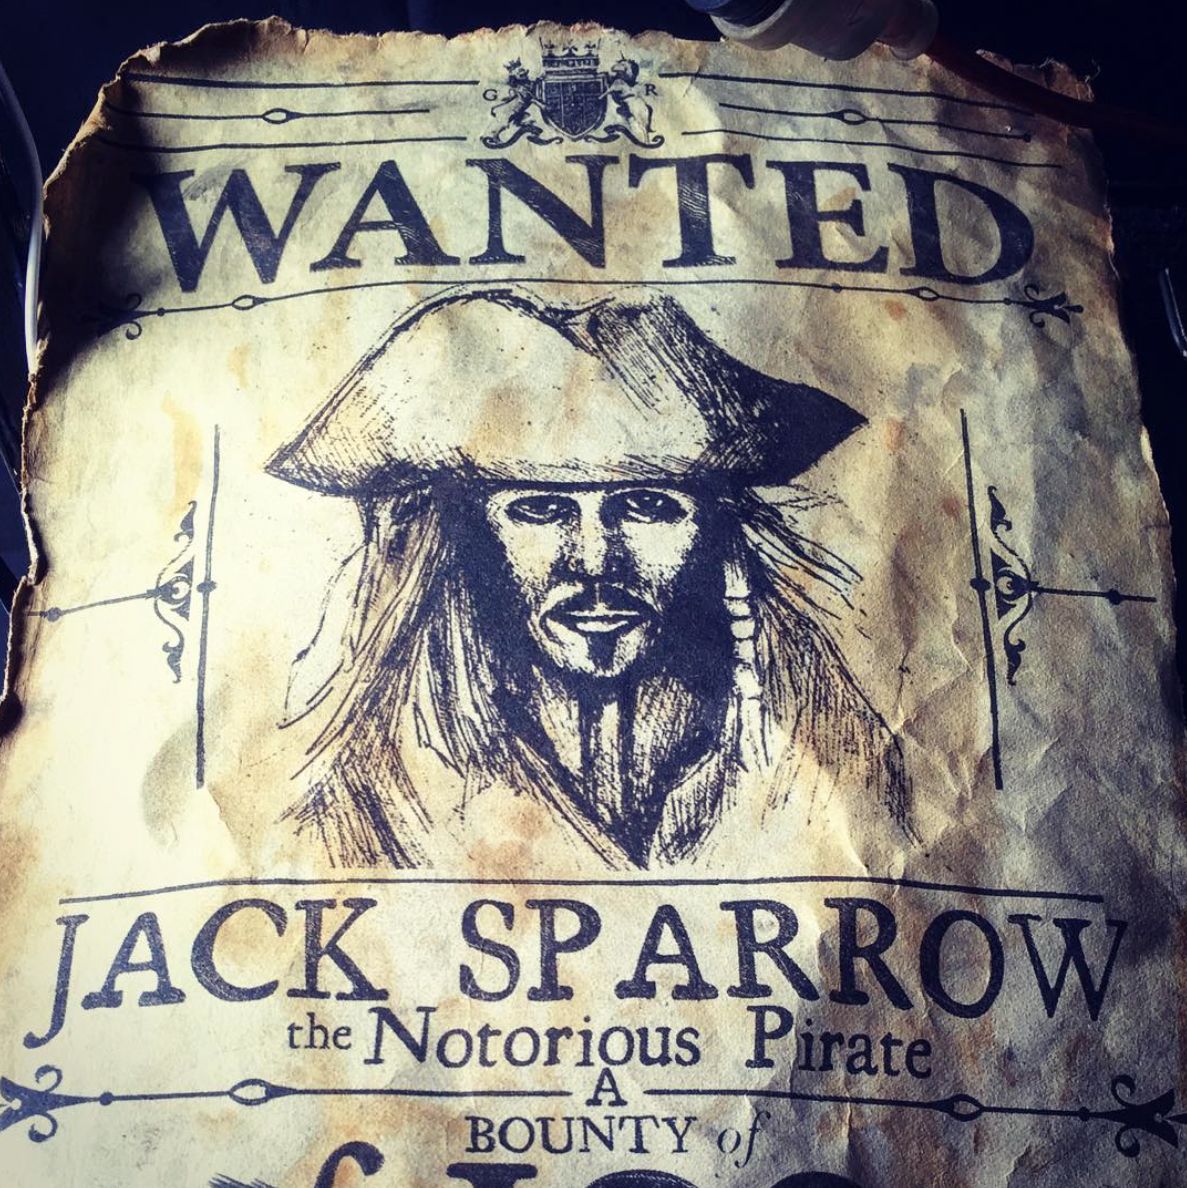 Pirates of the Caribbean: Dead Men Tell No Tales - Wanted poster